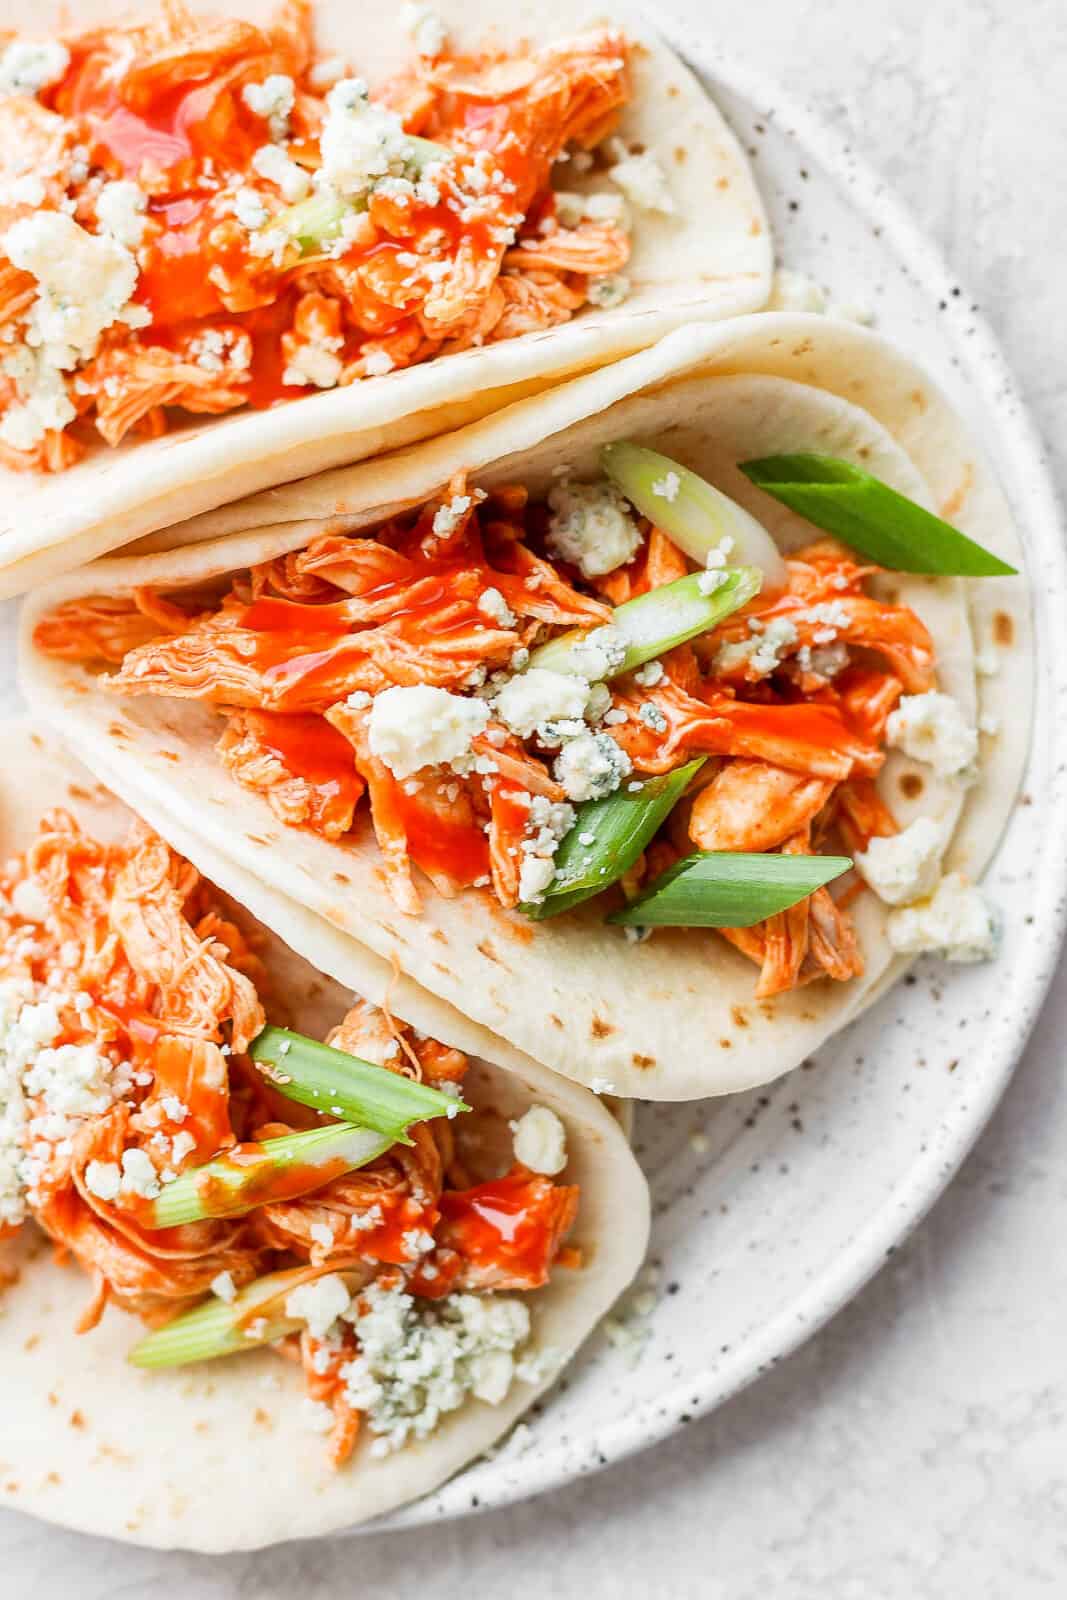 Buffalo chicken tacos on a plate.